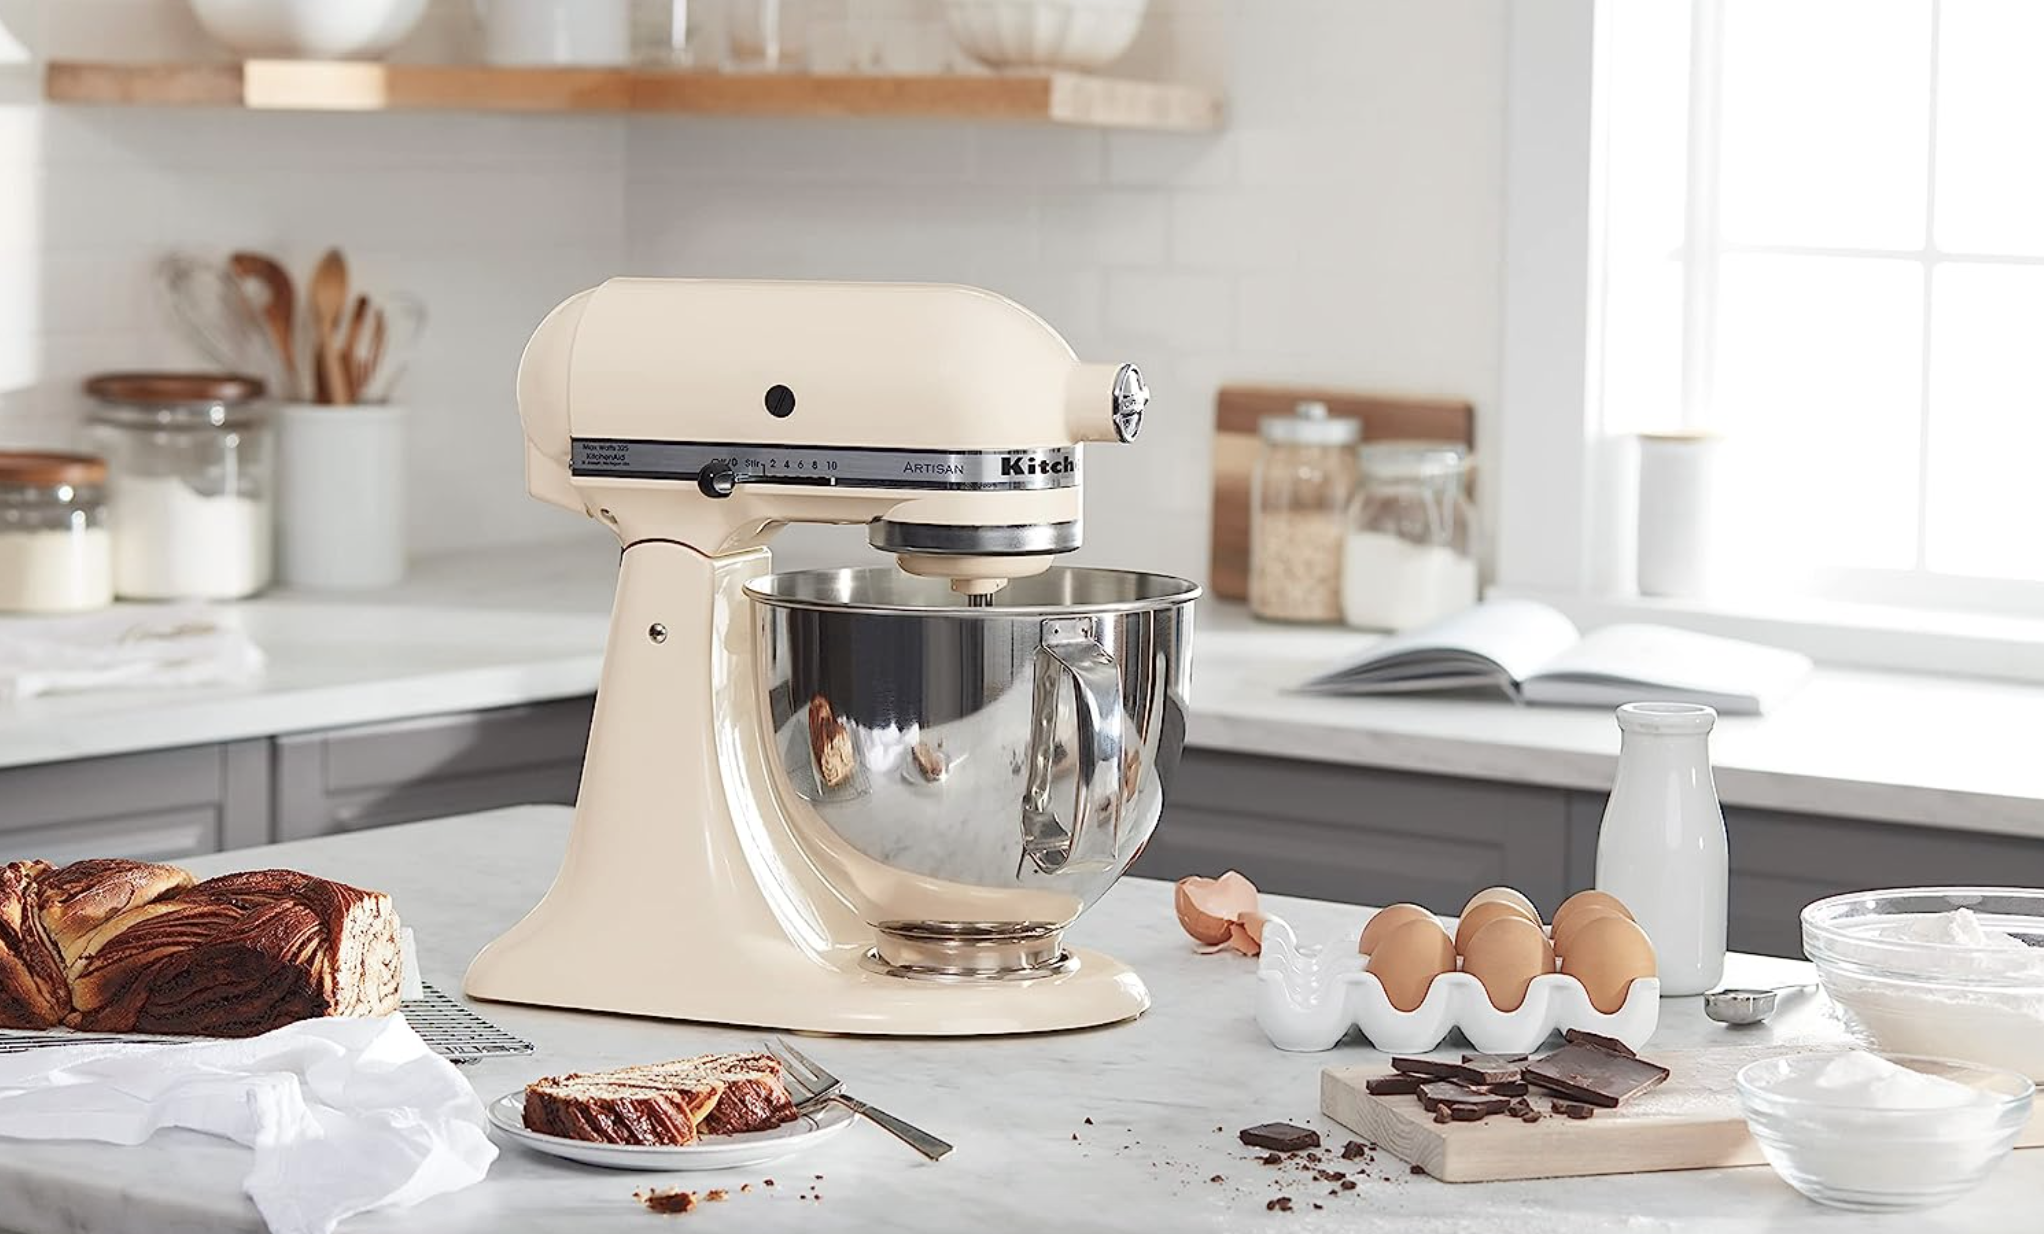 KitchenAid sale: Our favorite mixer is 22% off at Amazon | Underscored